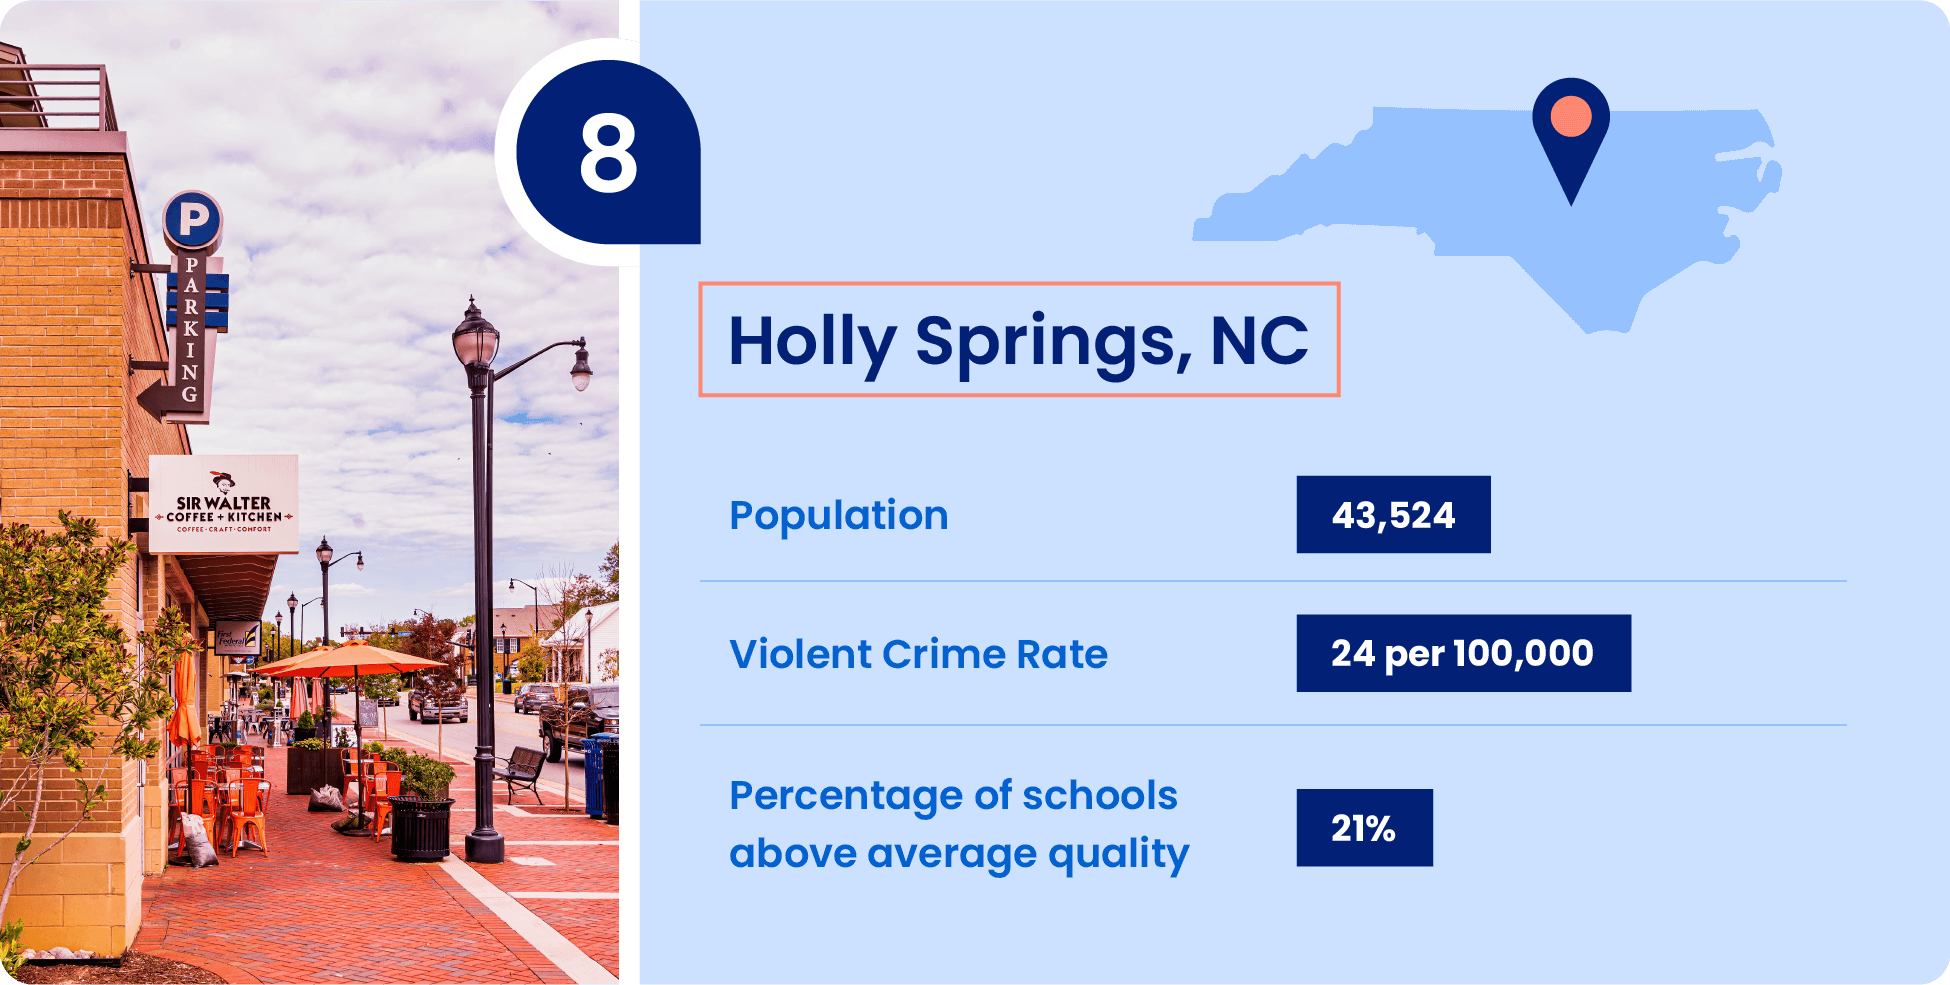 Image shows key information that make Holly Springs, North Carolina a great place to raise a family.